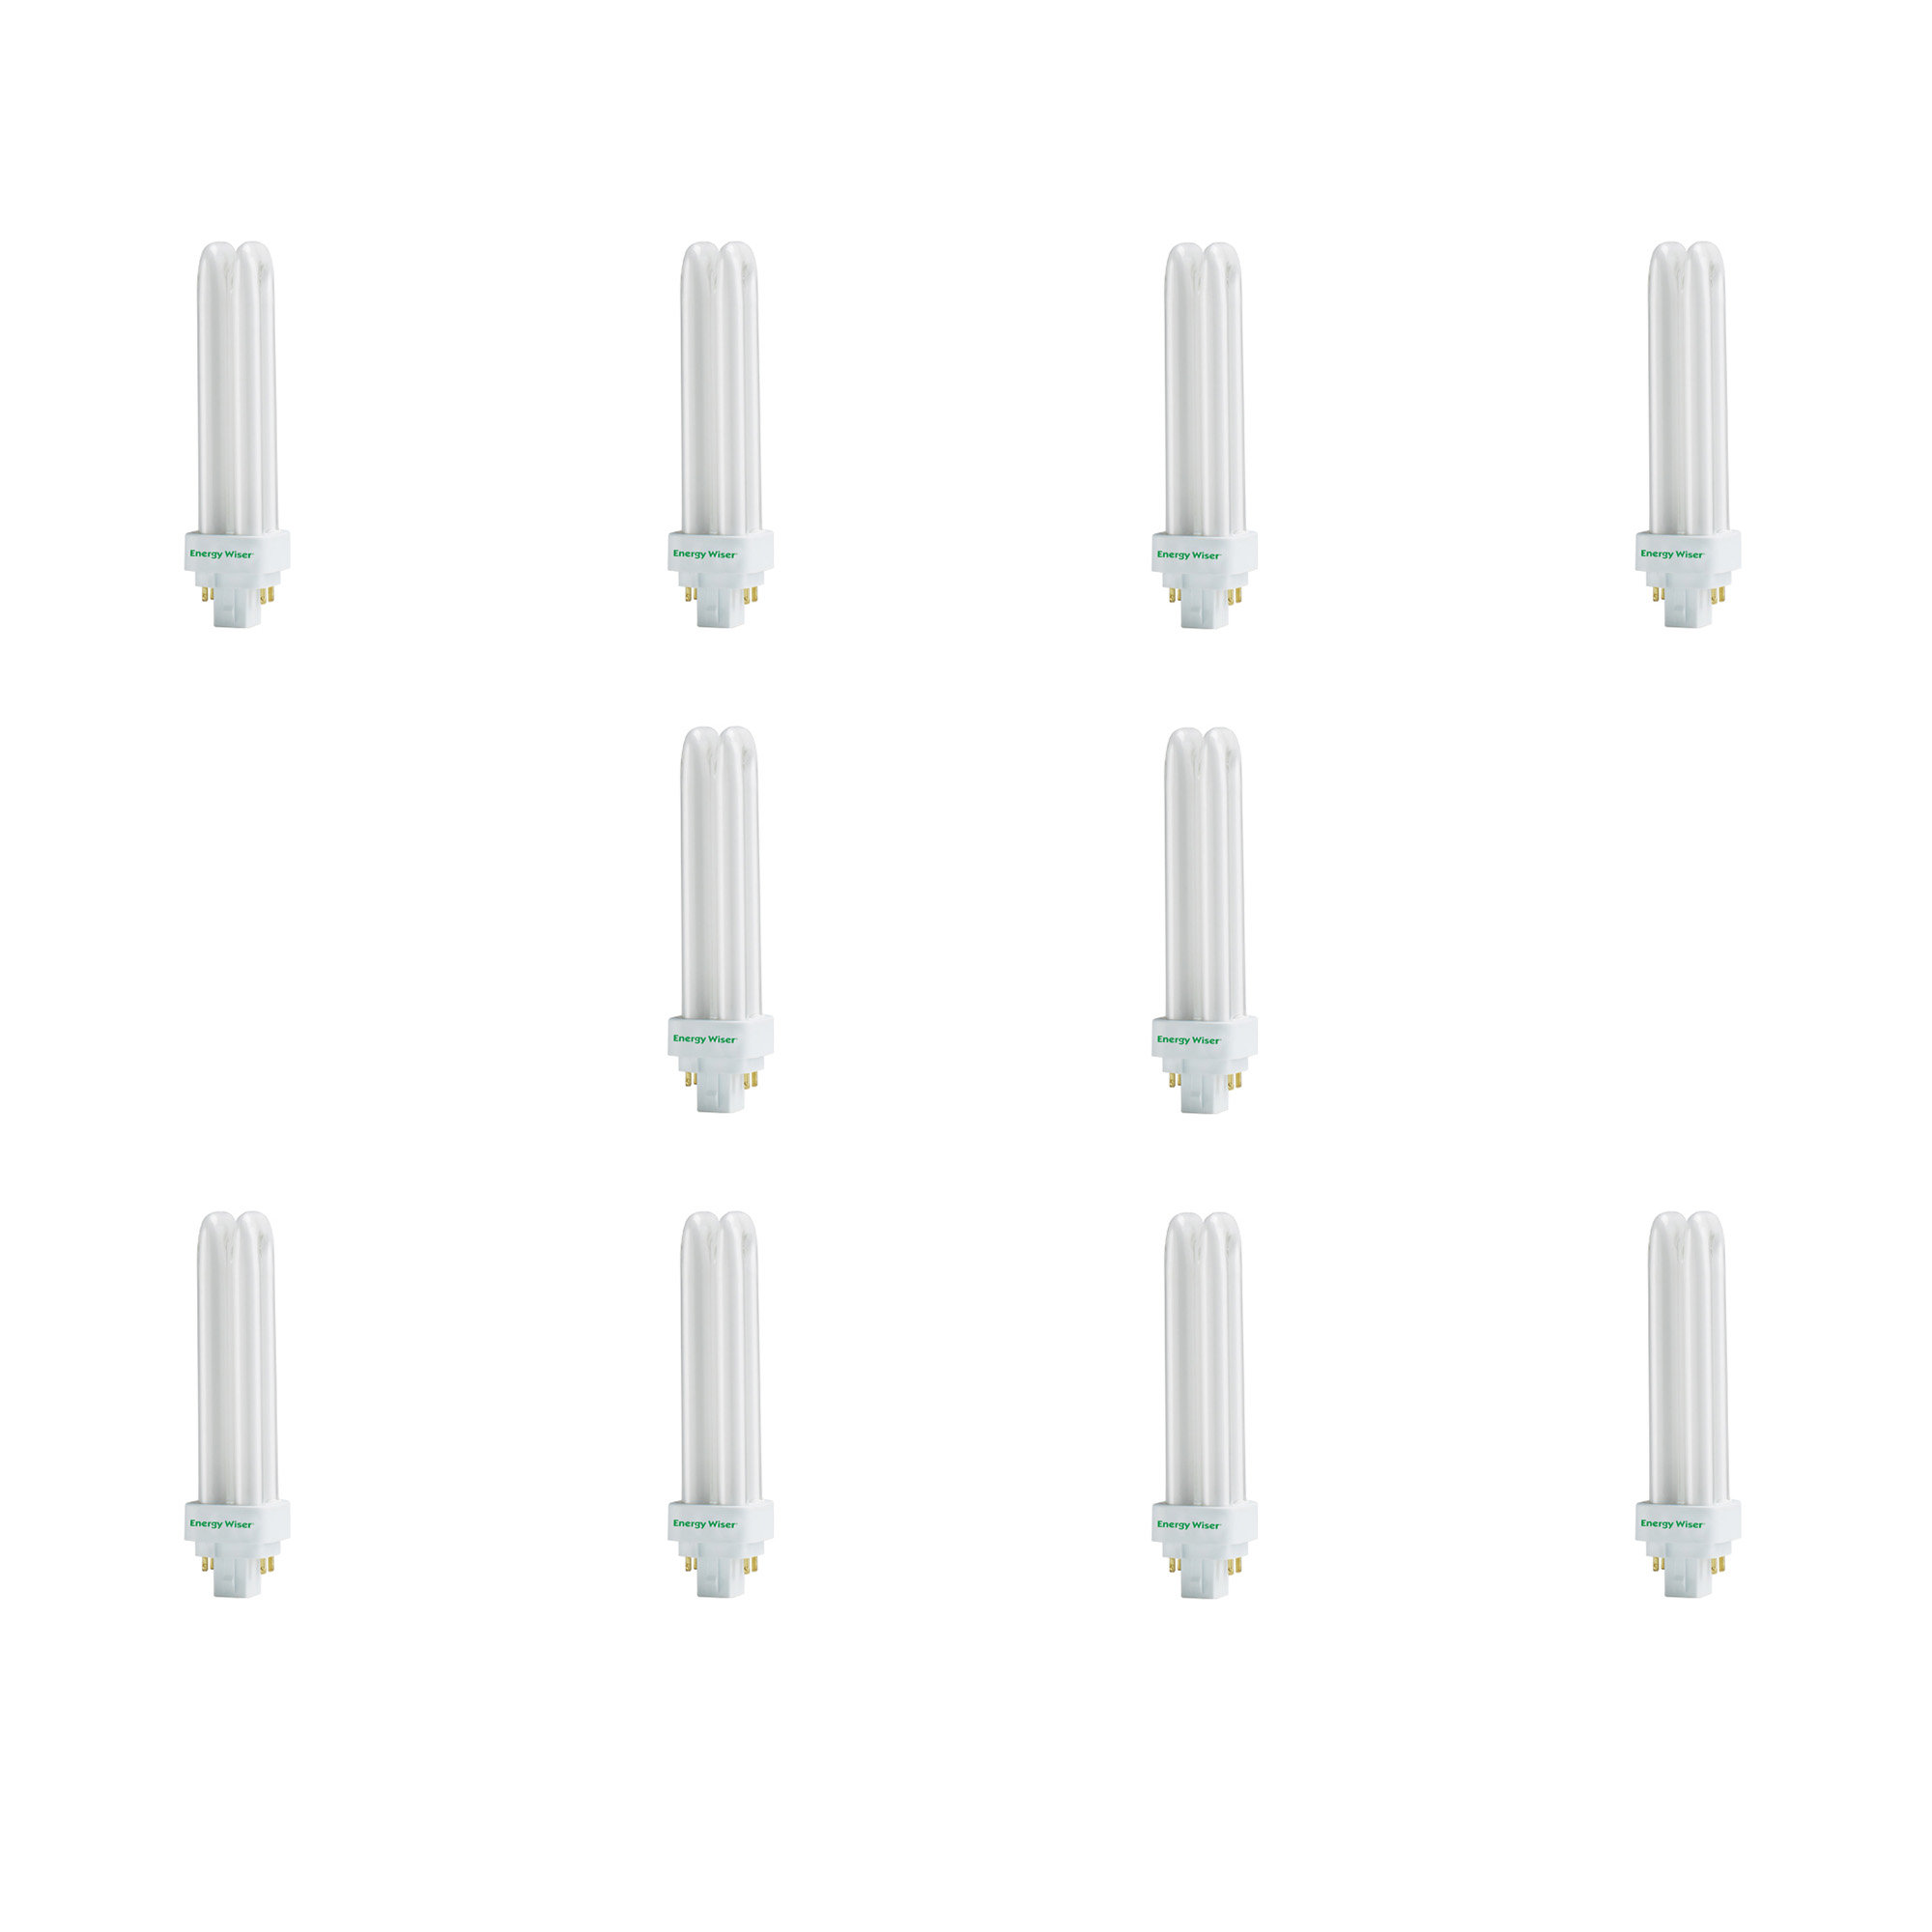 10 Pack Bulbrite 860511 26 W Dimmable T4 Shape CFL Bulb Frost G24Q-3 Base